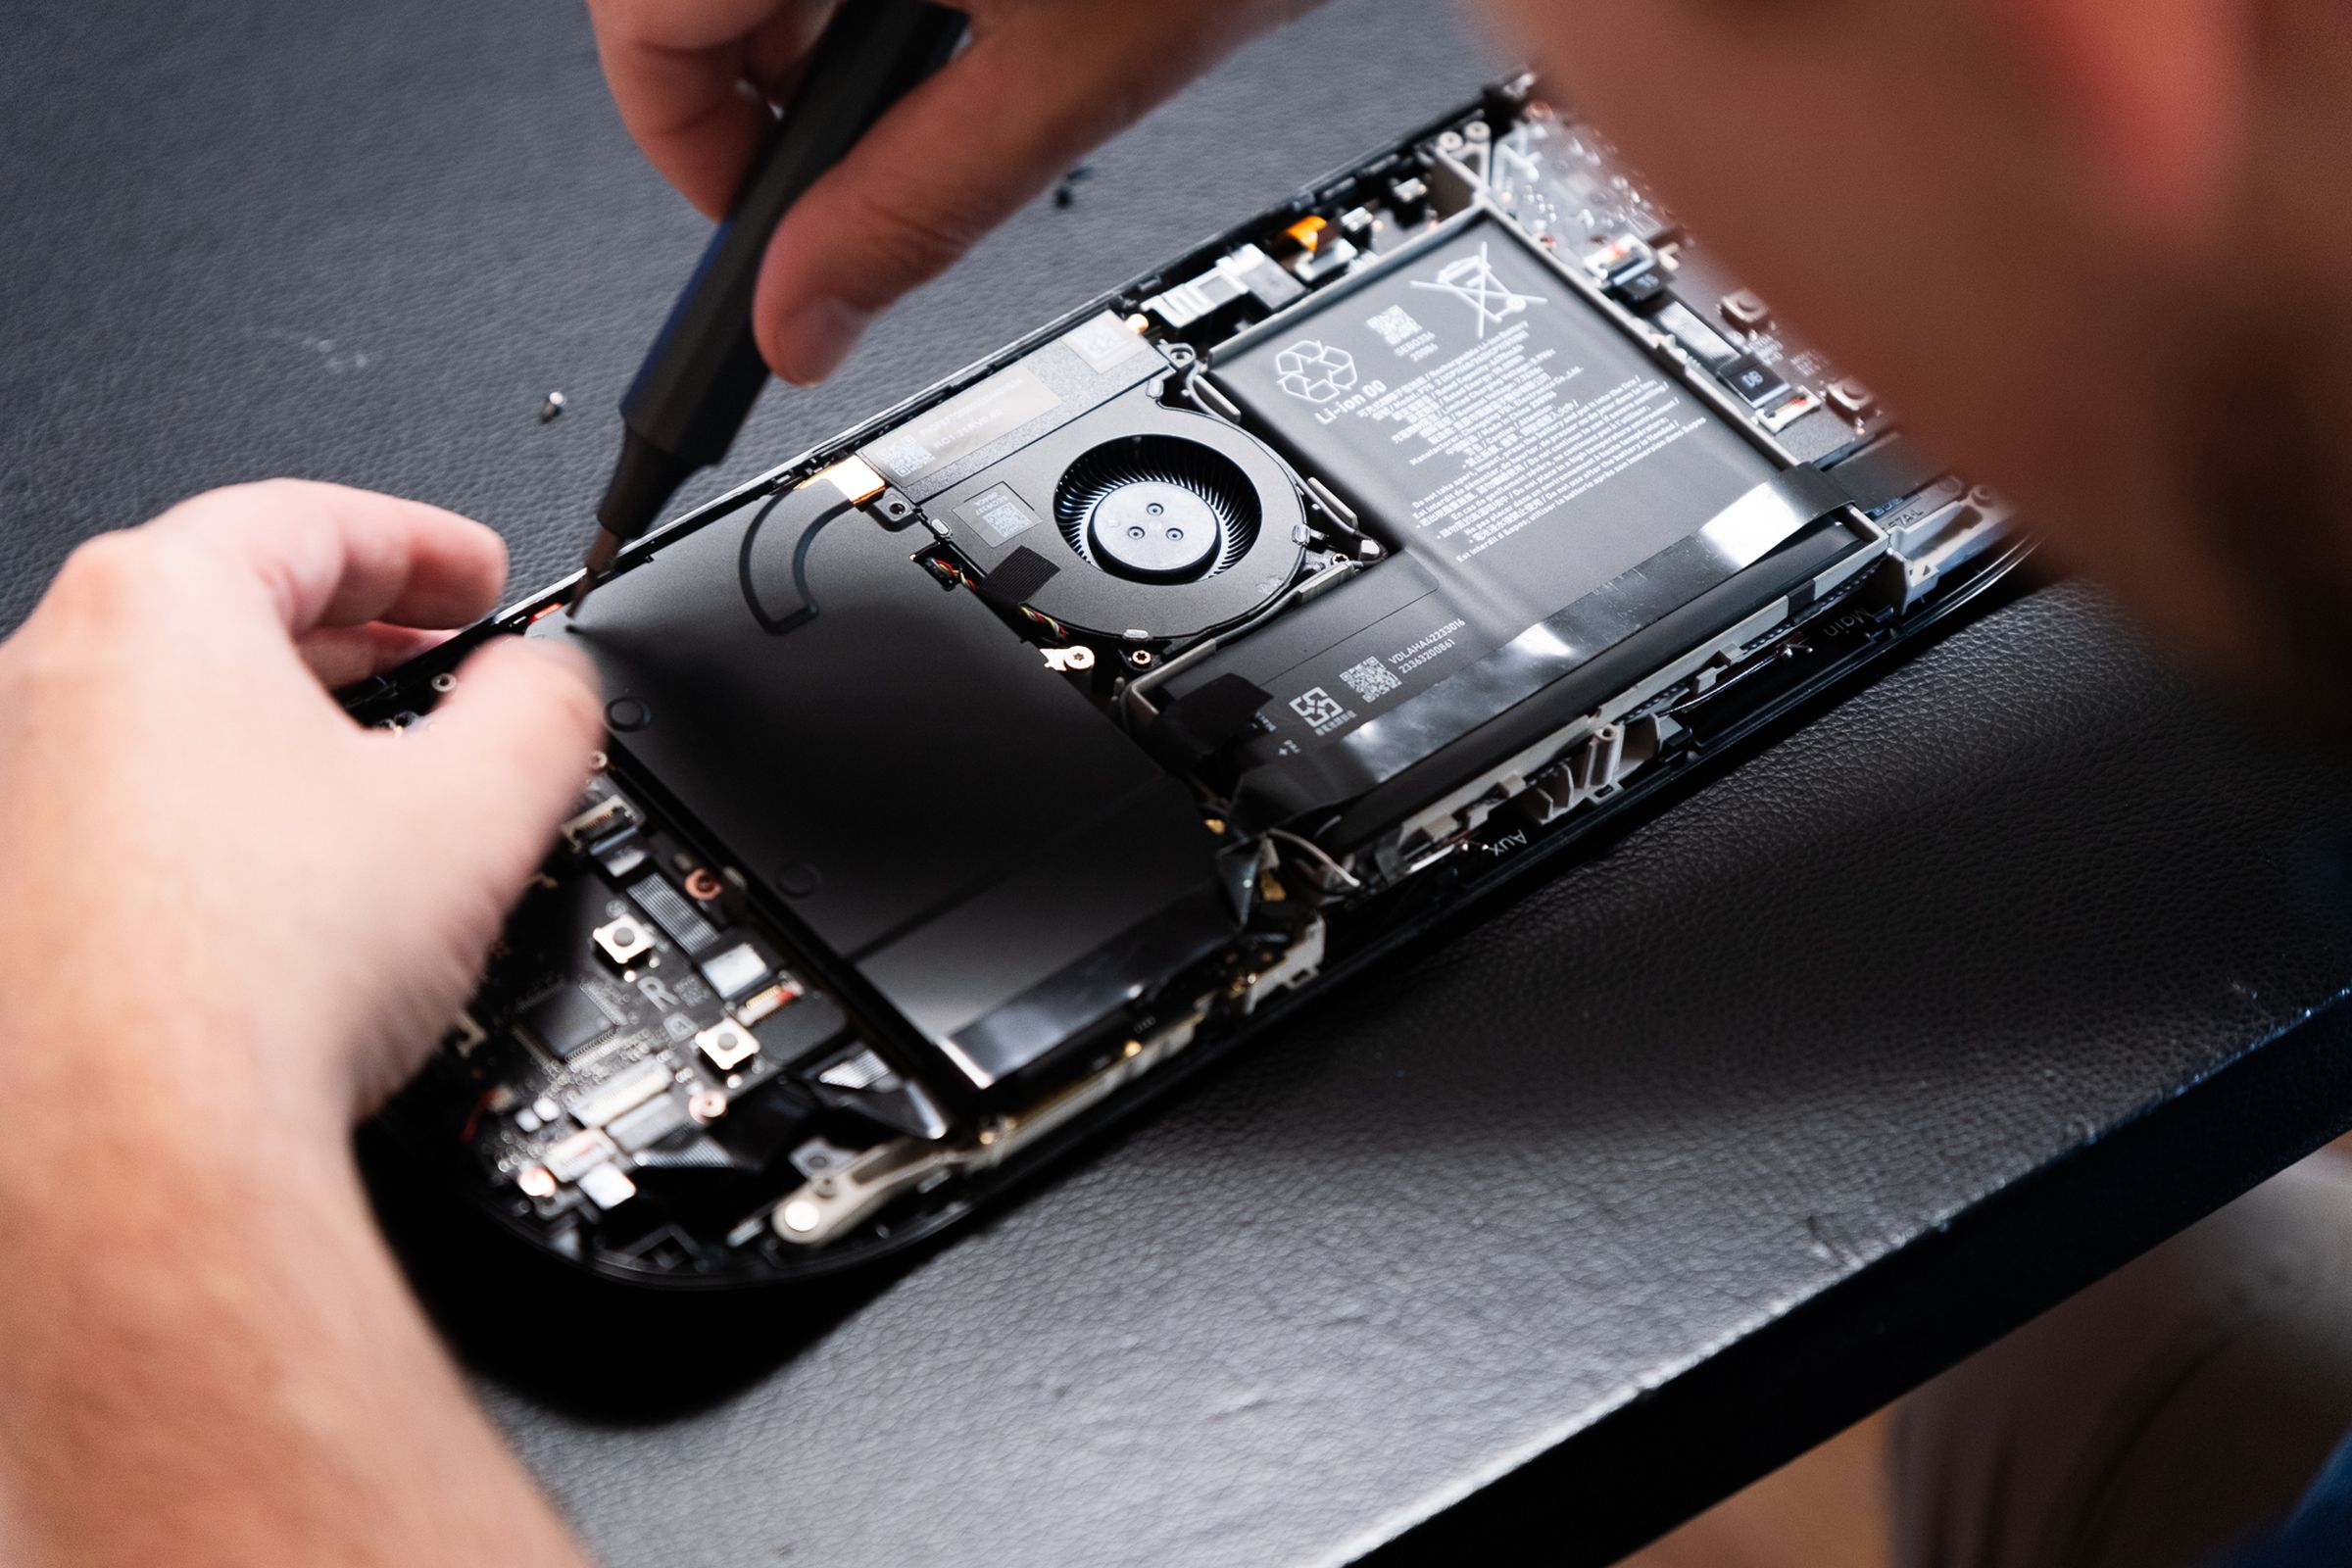 Valve says the Deck is more repairable than ever, with Torx screws, fewer repair steps, machine screw bosses for the back cover, and a screen you can replace all by itself.